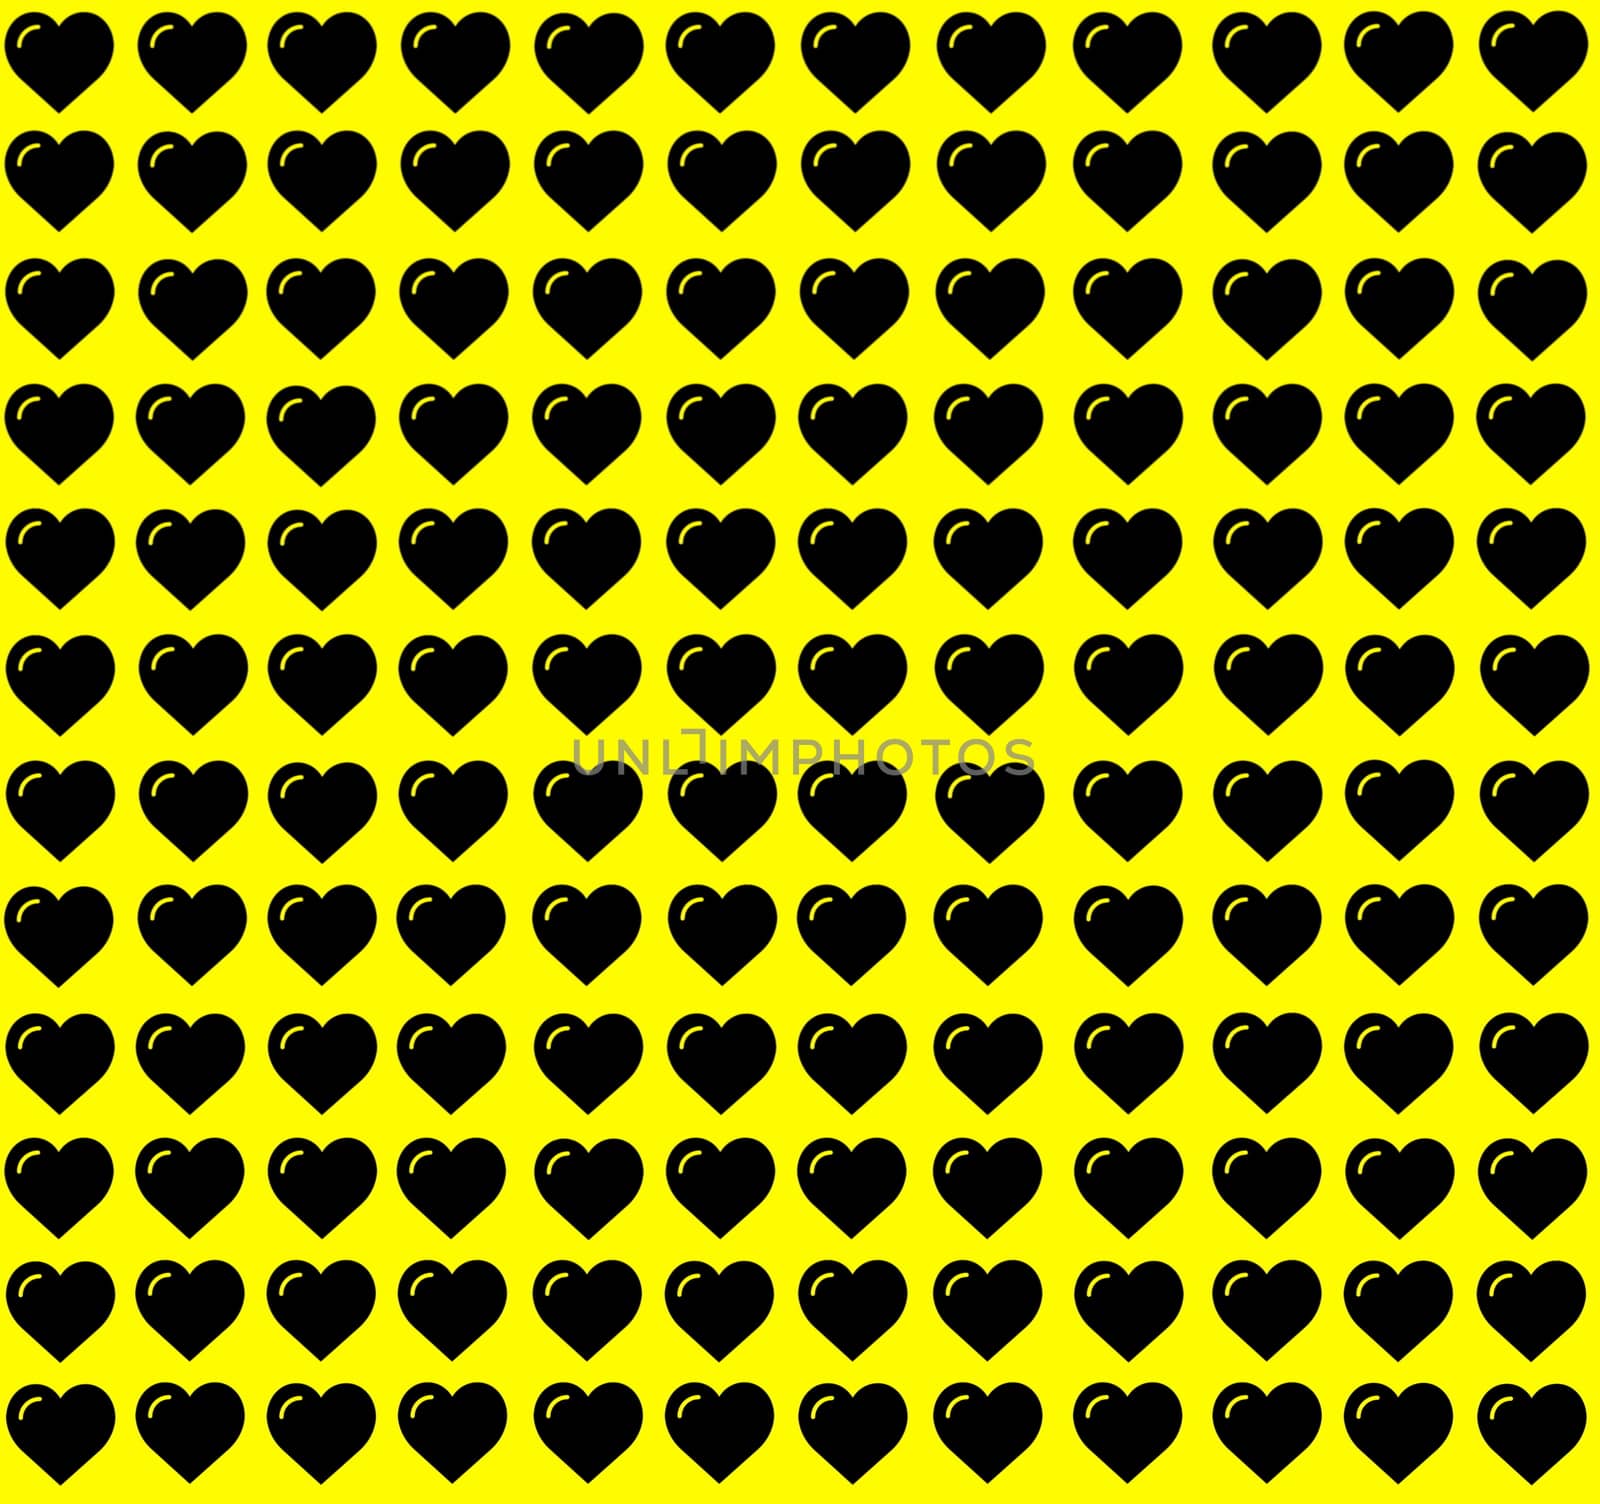 Black Heart Shape on Yellow Background. Hearts Dot Design. Can be used for Illustration purpose, background, website, businesses, presentations, Product Promotions etc.